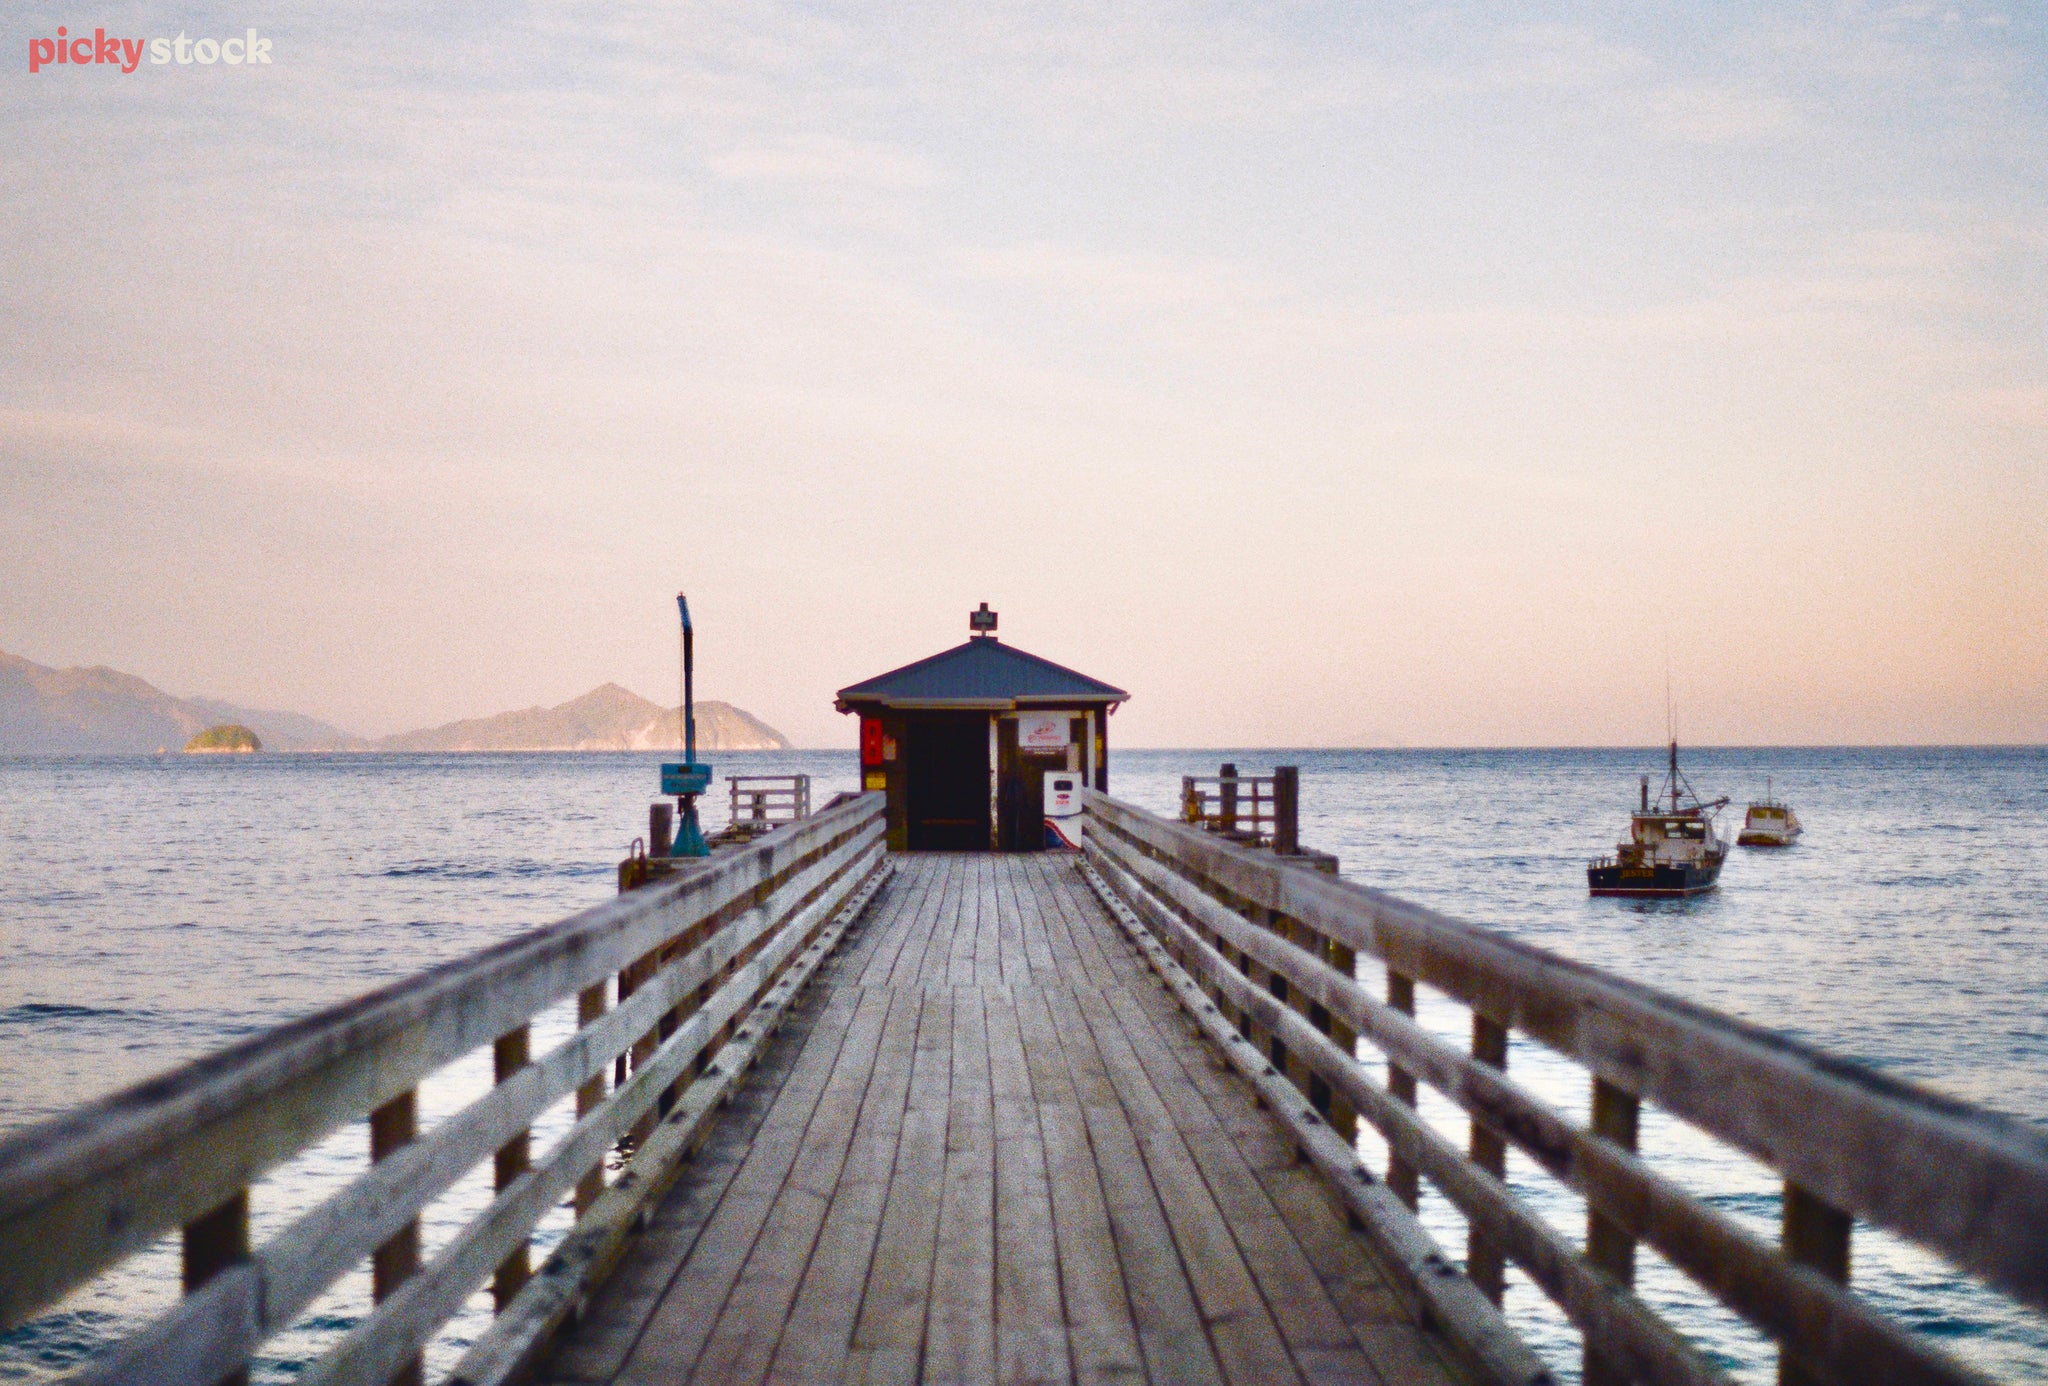 image of French Pass Pier at sunset. Boats to the right of the image in the sea. Water is blue, light is golden, soft sunrise. Small green building at the end of the pier 